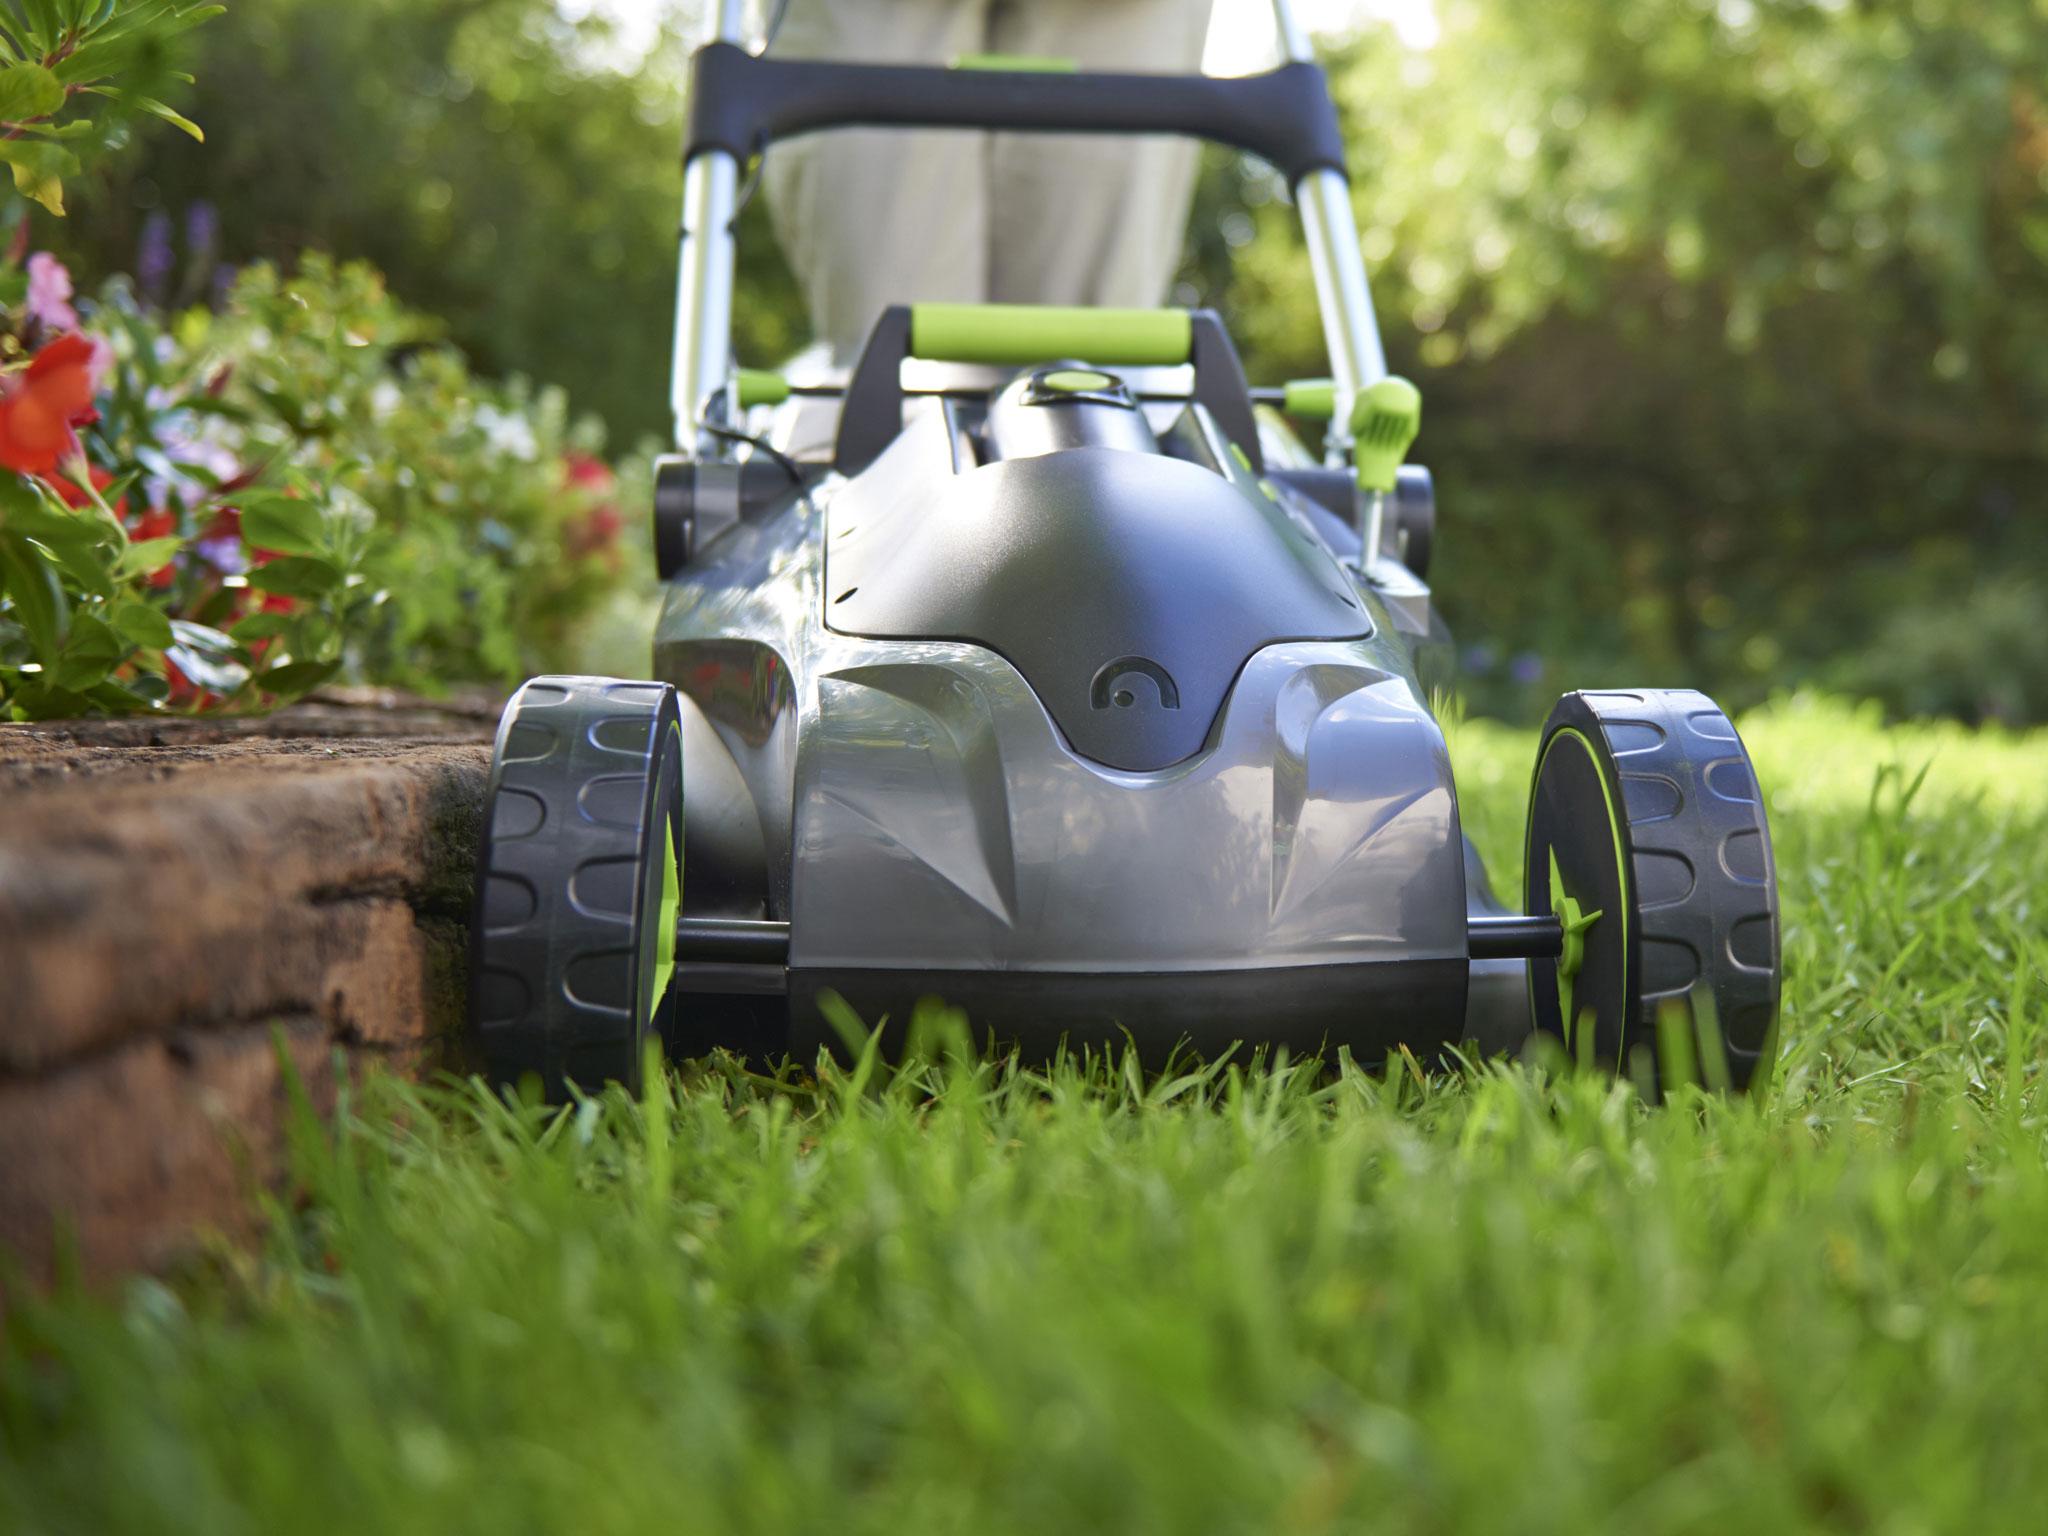 Lush green lawns could be a thing of the past due to climate change